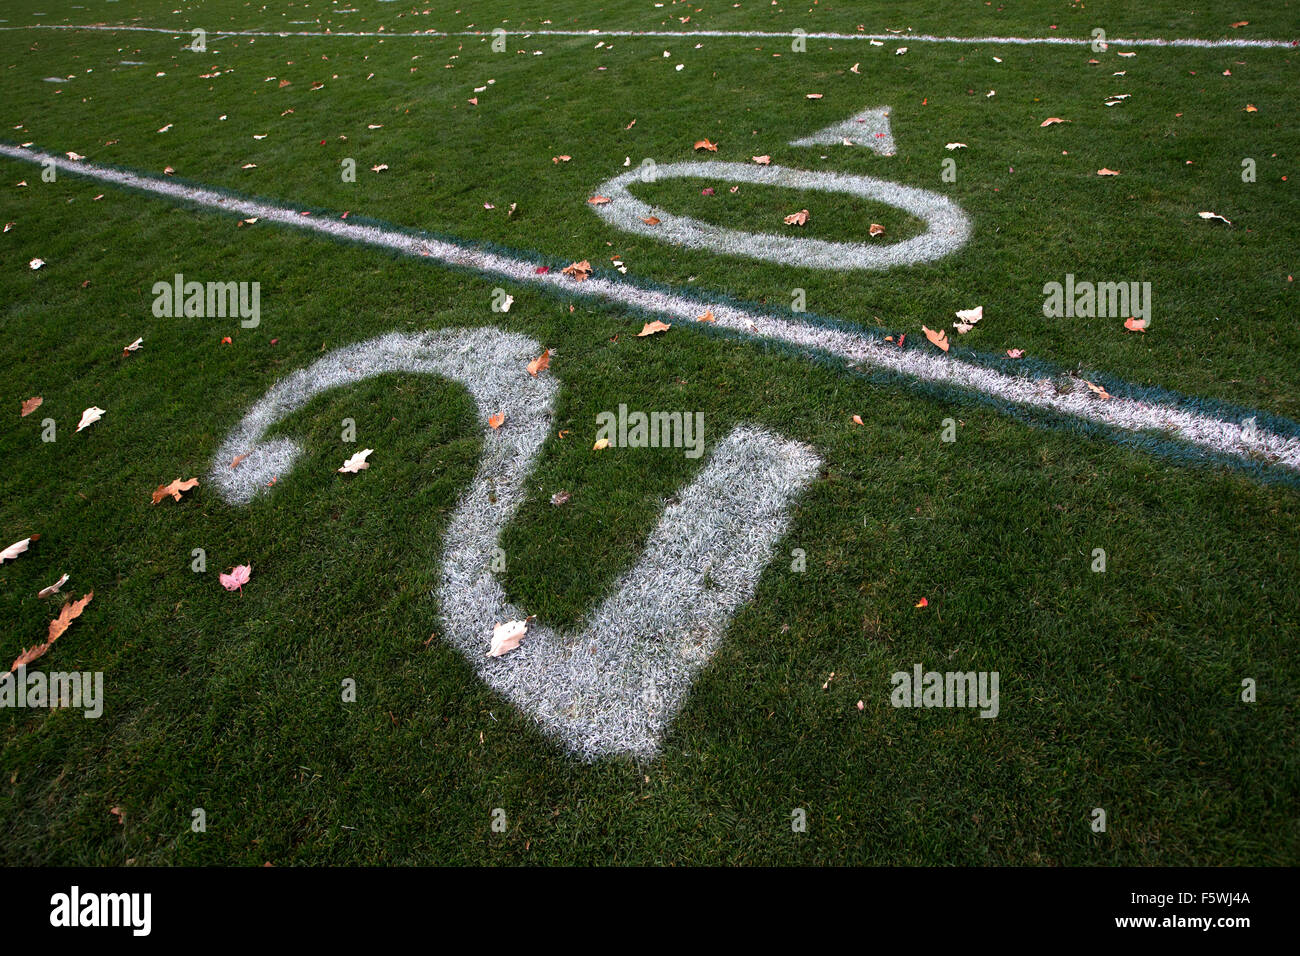 American football field 20 cour ligne marker Banque D'Images